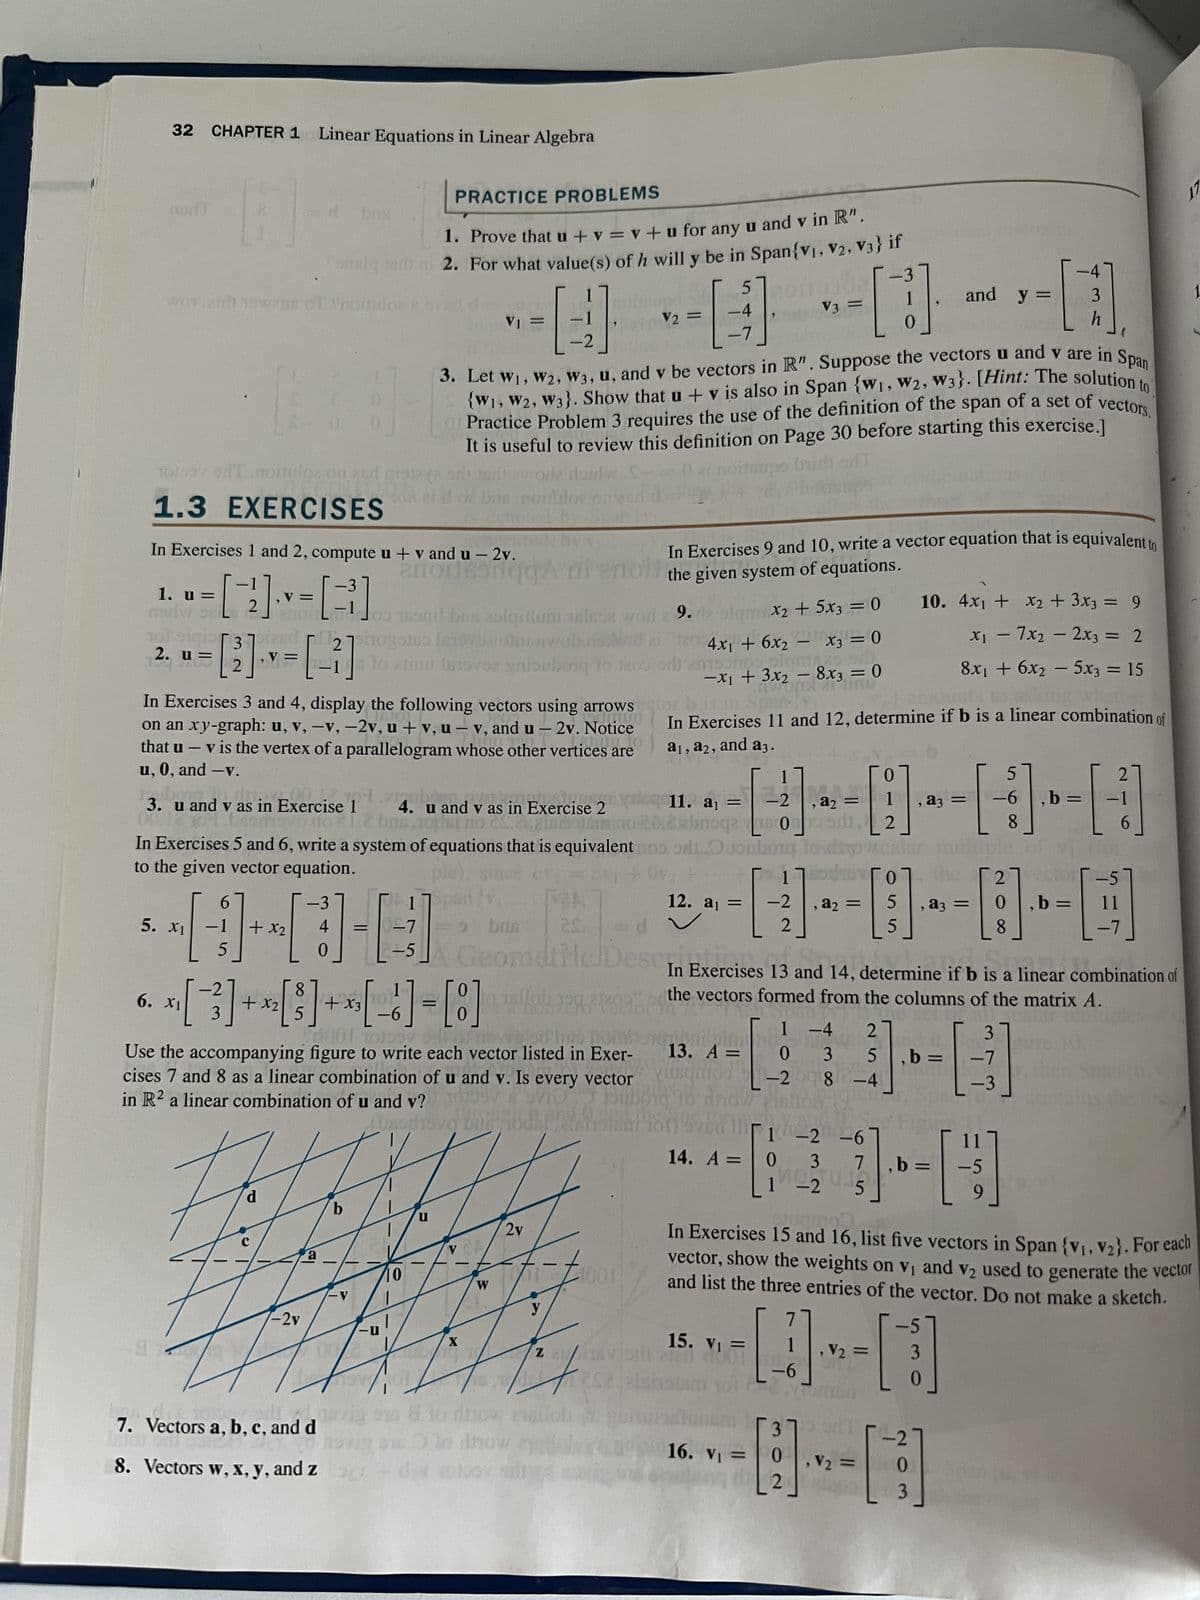 32 CHAPTER 1 Linear Equations in Linear Algebra
nort
A
worairt nowns of noitulos e
PRACTICE PROBLEMS
1. Prove that u + v = v +u for any u and v in R".
omsiq Jam 2. For what value(s) of h will y be in Span{V₁, V2, V3} if
fonsig
5
-4
--------
toloov oil noiioz on 250
1.3 EXERCISES
5. X₁
d
H
6
5
bas
2. u = [2] . v = [-²]
In Exercises 3 and 4, display the following vectors using arrows
amun
on an xy-graph: u, v, -v, -2v, u + v, u-v, and u-2v. Notice
STILL.CO
that u - v is the vertex of a parallelogram whose other vertices are
u, 0, and -v.
0
1. u=
= [²1] = []
mar 200 169nil bas asigillum als word 29. le olqmX₂ + 5x3 = 0
³] manif bris
nov.0
161
3. u and v as in Exercise 1 4. u and v as in Exercise 2
sachsvo no clcbus,nos no CS. lsdotén
d
ated by
In Exercises 9 and 10, write a vector equation that is equivalent to
In Exercises 1 and 2, compute u + v and u-2v.
anonsonqgA ni enol the given system of equations.
HUB
=
+ x2
0
-2v
a
1.5
7. Vectors a, b, c, and d
2010
rol
=
*[3] + [3] + [6] - [8]
6. X1
x2
x3
-6
27pogolo Isrovni awobrisdi
lo alinu Imoves gniouborq to 1200 od among r
b
-V
-U
H
=
-5
0001 10100
SU
Use the accompanying figure to write each vector listed in Exer-
cises 7 and 8 as a linear combination of u and v. Is every vector
1
in R2 a linear combination of u and v? TOY SVIO
(bascovo bigod
3. Let W1, W2, W3, u, and v be vectors in R". Suppose the vectors u and v are in Span
{W1, W2, W3}. Show that u + v is also in Span (W₁, W2, W3}. [Hint: The solution to
Practice Problem 3 requires the use of the definition of the span of a set of vectors.
It is useful to review this definition on Page 30 before starting this exercise.]
arT
terü avrora dordy
noitrups
Une combl
In Exercises 5 and 6, write a system of equations that is equivalent noo, oh Odoubring todizovacala
to the given vector equation.
ple), since
1
V CA
X
W
2v
VA
=
y
-
1
011001
1²/
Z 18V 1
252falsi
novi s to drown
lo
8. Vectors w, x, y, and zdolay sill
20
4x1 + 6x2 - x3 = 0
-x₁ + 3x₂ - 8x3 = 0
21 ling
11. a₁ =
=
V3
In Exercises 11 and 12, determine if b is a linear combination of
a1, a2, and a3.
0
, =
------
2
12. a₁ =
1
-2
14. A =
-2
15. V₁ =
=> bos
= d
2
Geometric Desc In Exercises 13 and 14, determine if b is a linear combination of
which
the vectors formed from the columns of the matrix A.
-1
13. A =
tistimos-2008
10 dnd
Fur
=
0
, = 5 , =
--------
5
1 -4 2
0 3 5 ,b=
1-2-6
3
0
14 -2 5
[1]
-6
370
16. V₁ =
0
uteng 2
and y =
10. 4x₁ + x2 + 3x3 = 9
x₁ - 7x₂ - 2x3 = 2
8x₁ + 6x₂ - 5x3 = 15
27.0²
b
3]-[
-7
, V₂ =
, V2: =
0
3
-6
2
11
- -5
9
5
3
0
3
h
8
8
In Exercises 15 and 16, list five vectors in Span {V₁, V₂). For each
vector, show the weights on v₁ and v2 used to generate the vector
and list the three entries of the vector. Do not make a sketch.
, b =
-1
-[-²]
6
b= 11
17